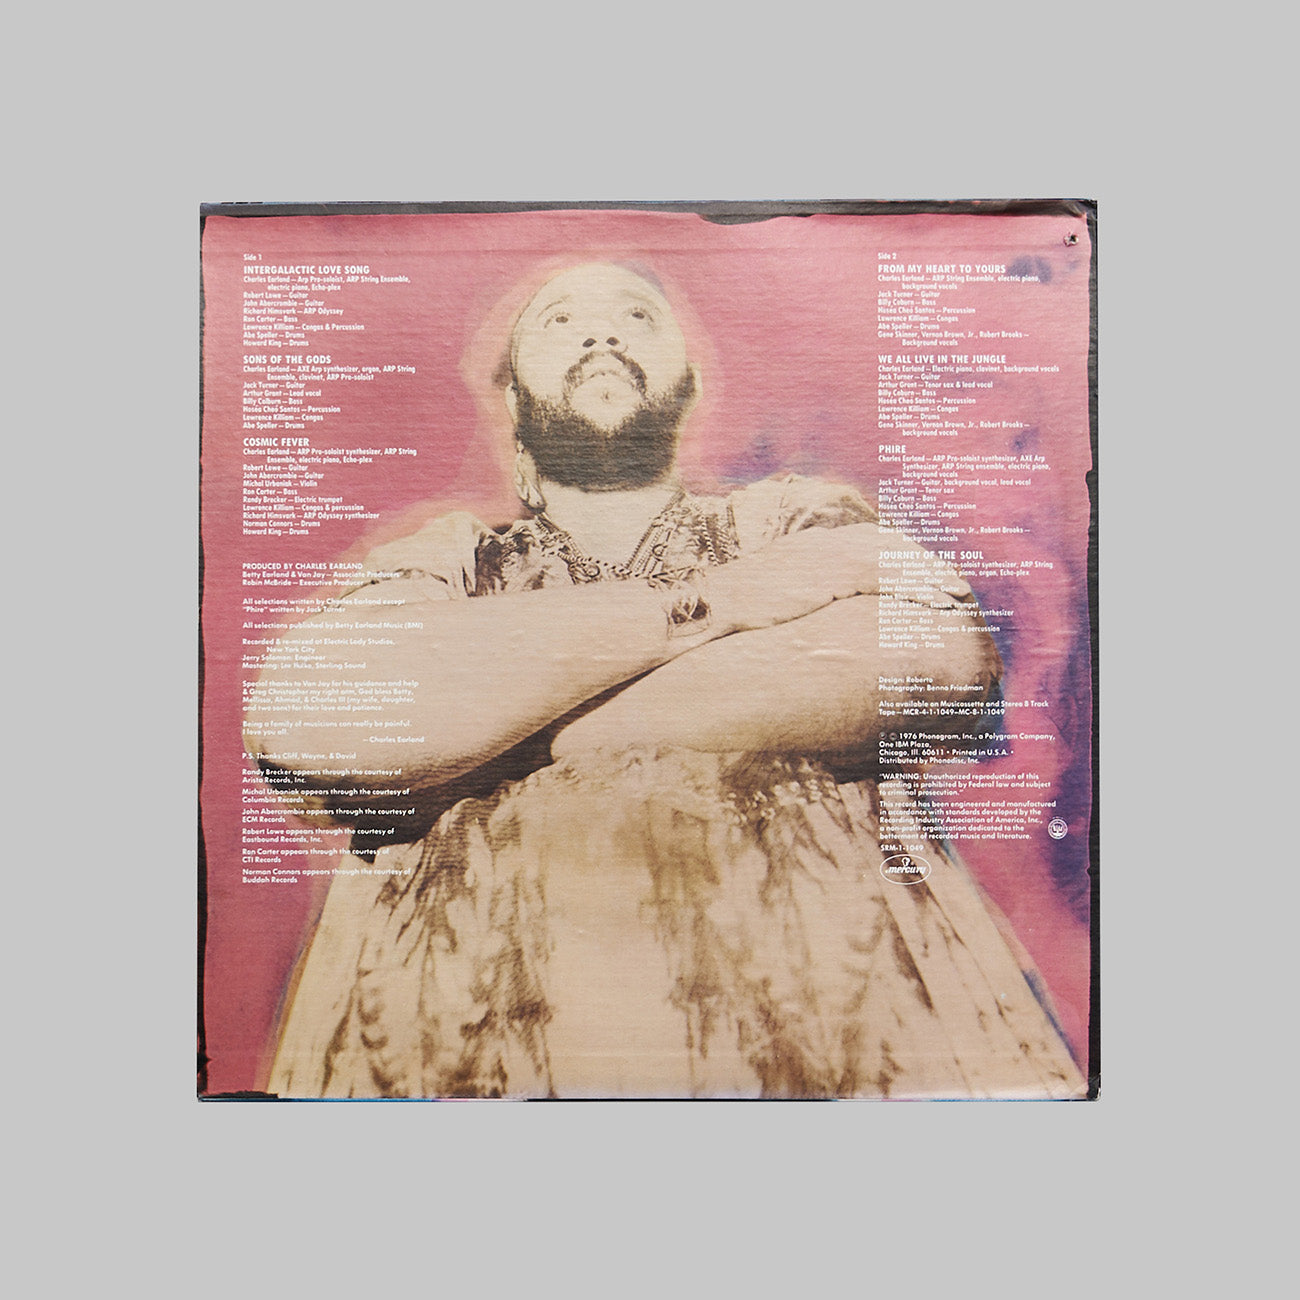 CHARLES EARLAND / ODYSSEY